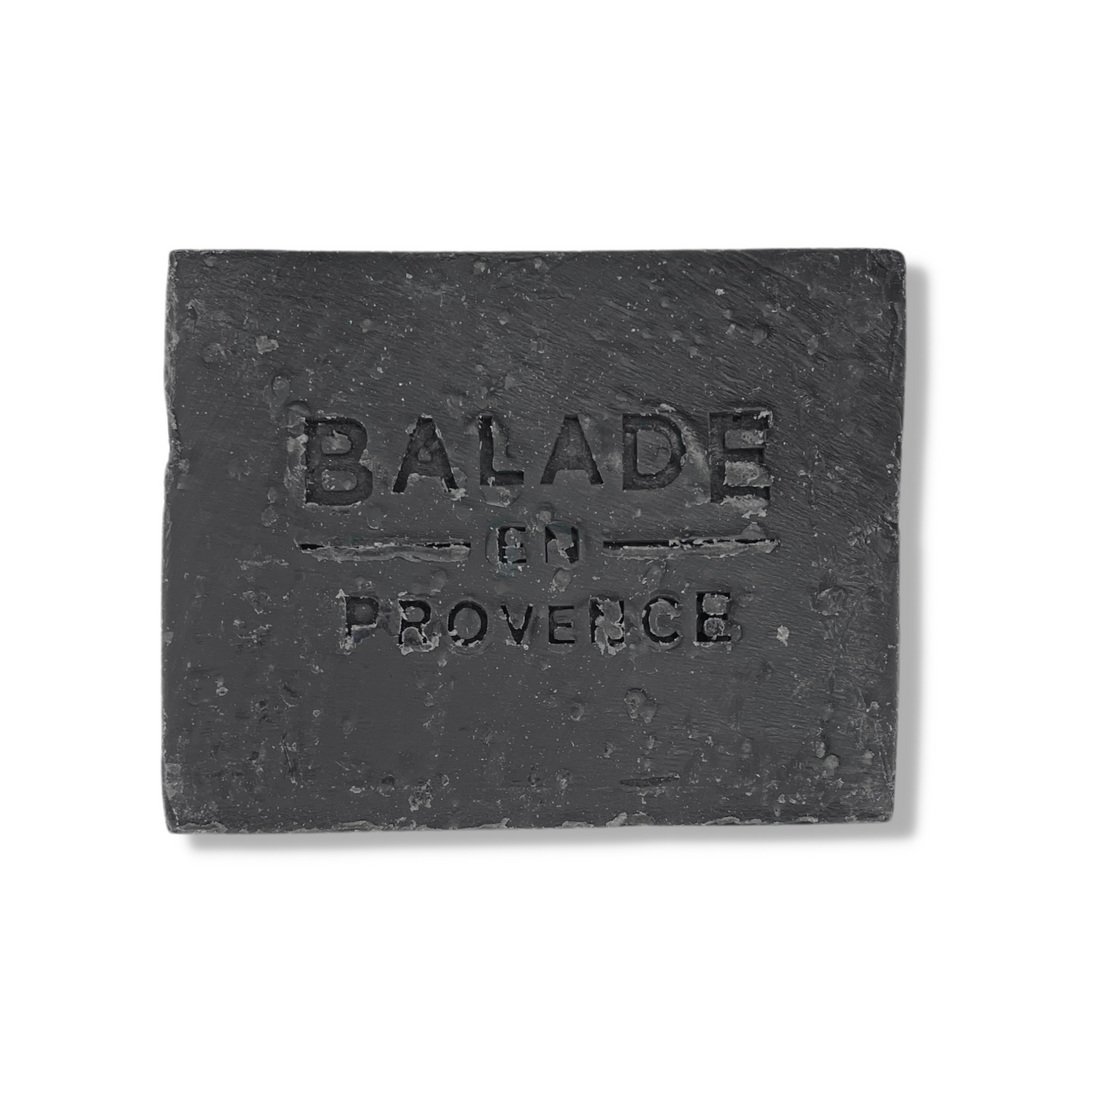 Balade En Provence All In One Bar For Face, Body, Hair, and Shaving, Shown On White Background.